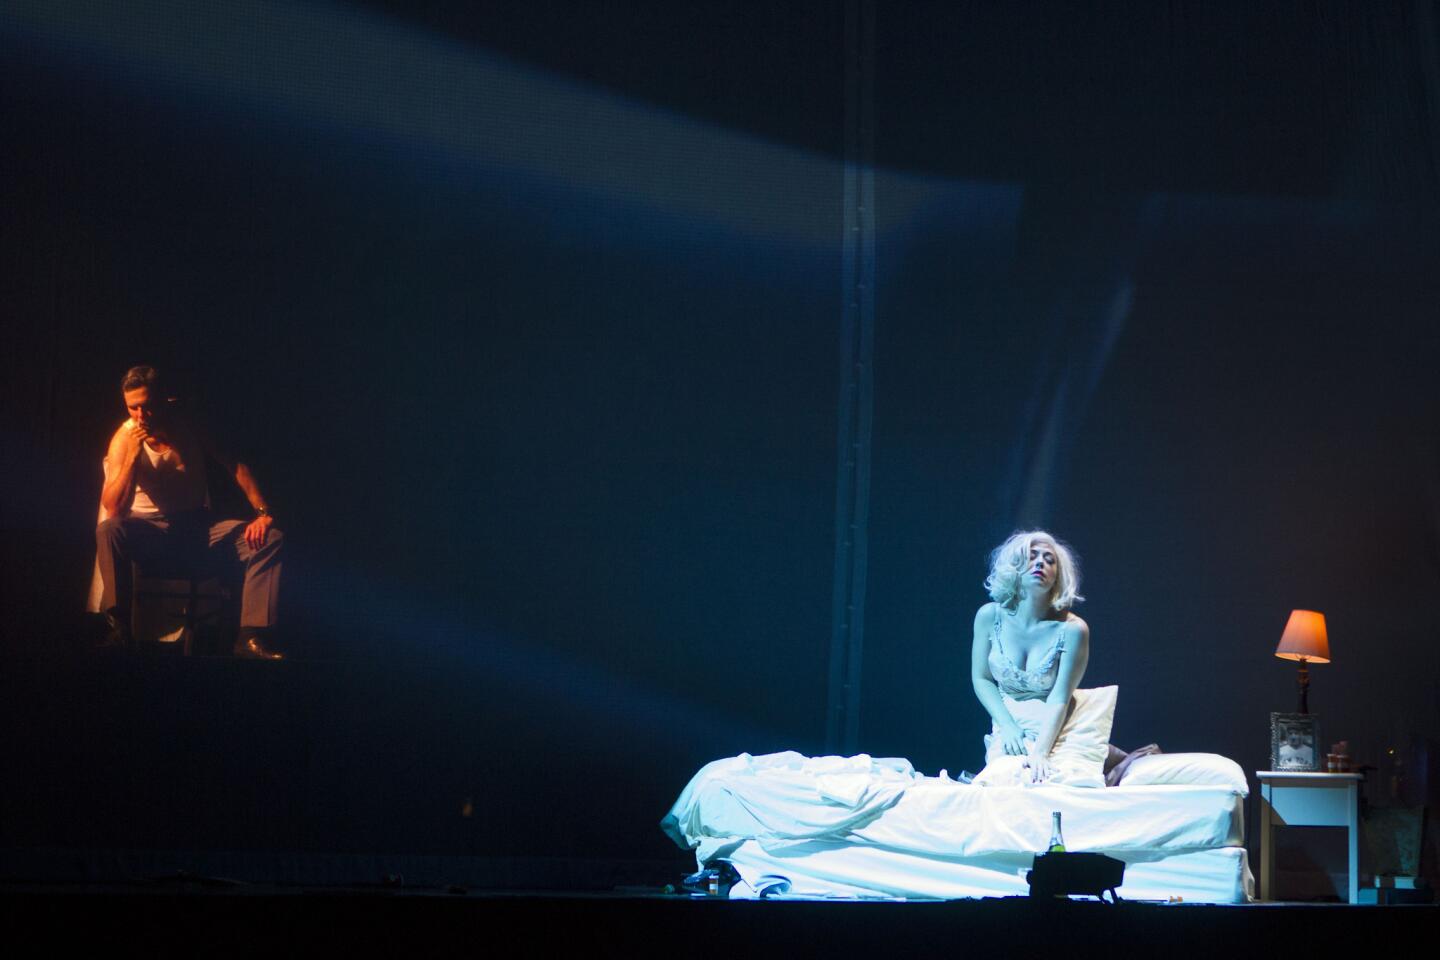 Cast members Lee Gregory, left, and Danielle Marcelle Bond rehearse "Marilyn Forever" at Warner Grand Theatre in San Pedro.